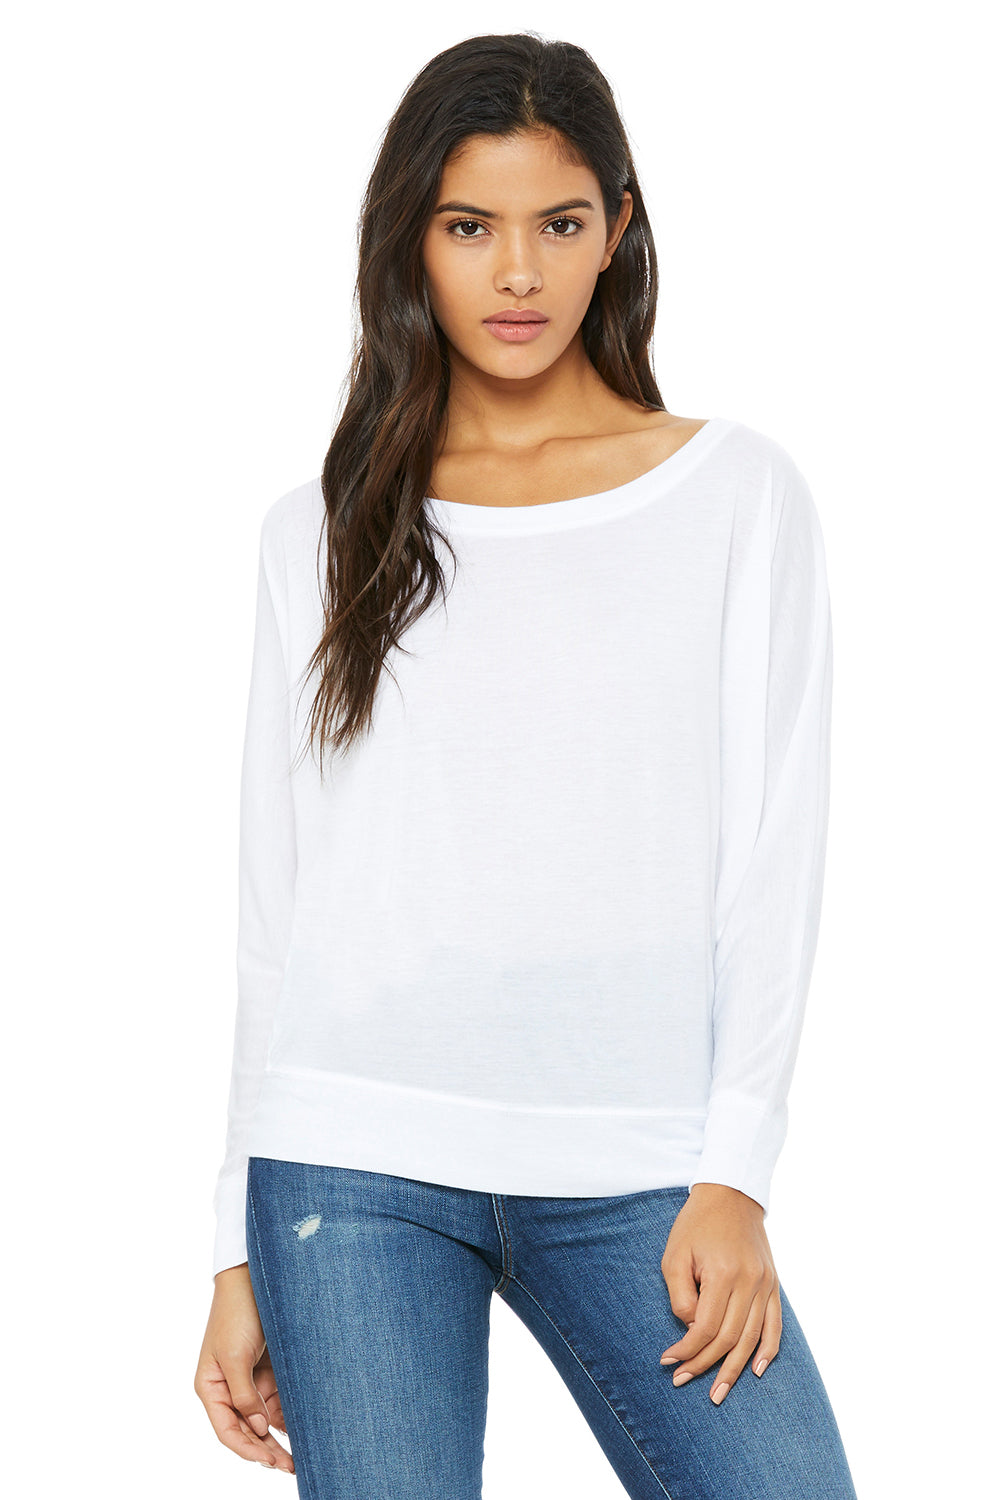 Bella + Canvas 8850 Womens Flowy Off Shoulder Long Sleeve Wide Neck T-Shirt White Front